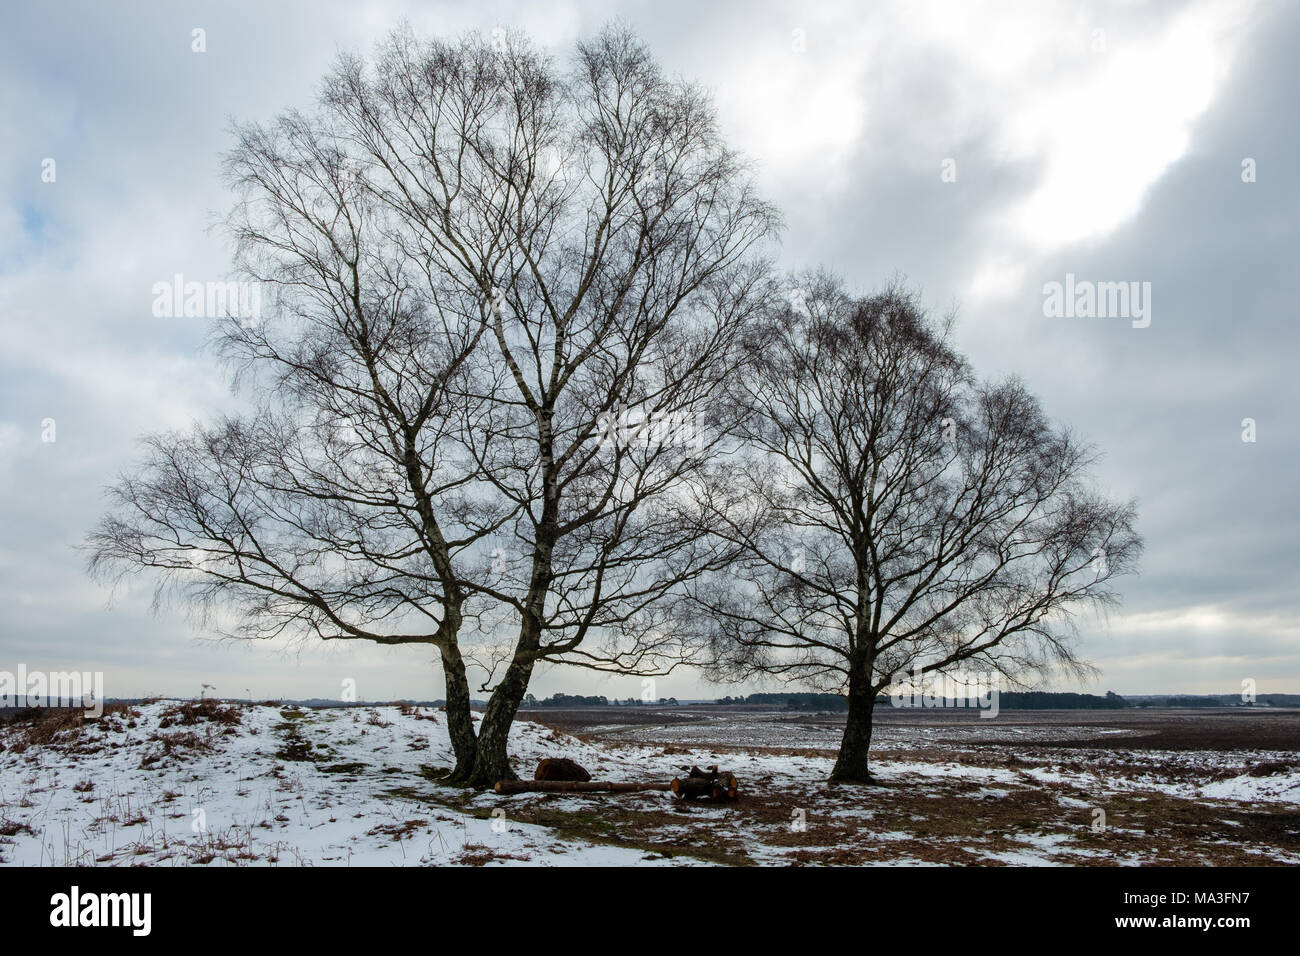 A Winter scene at Shatterford Bottom in The New Forest Stock Photo